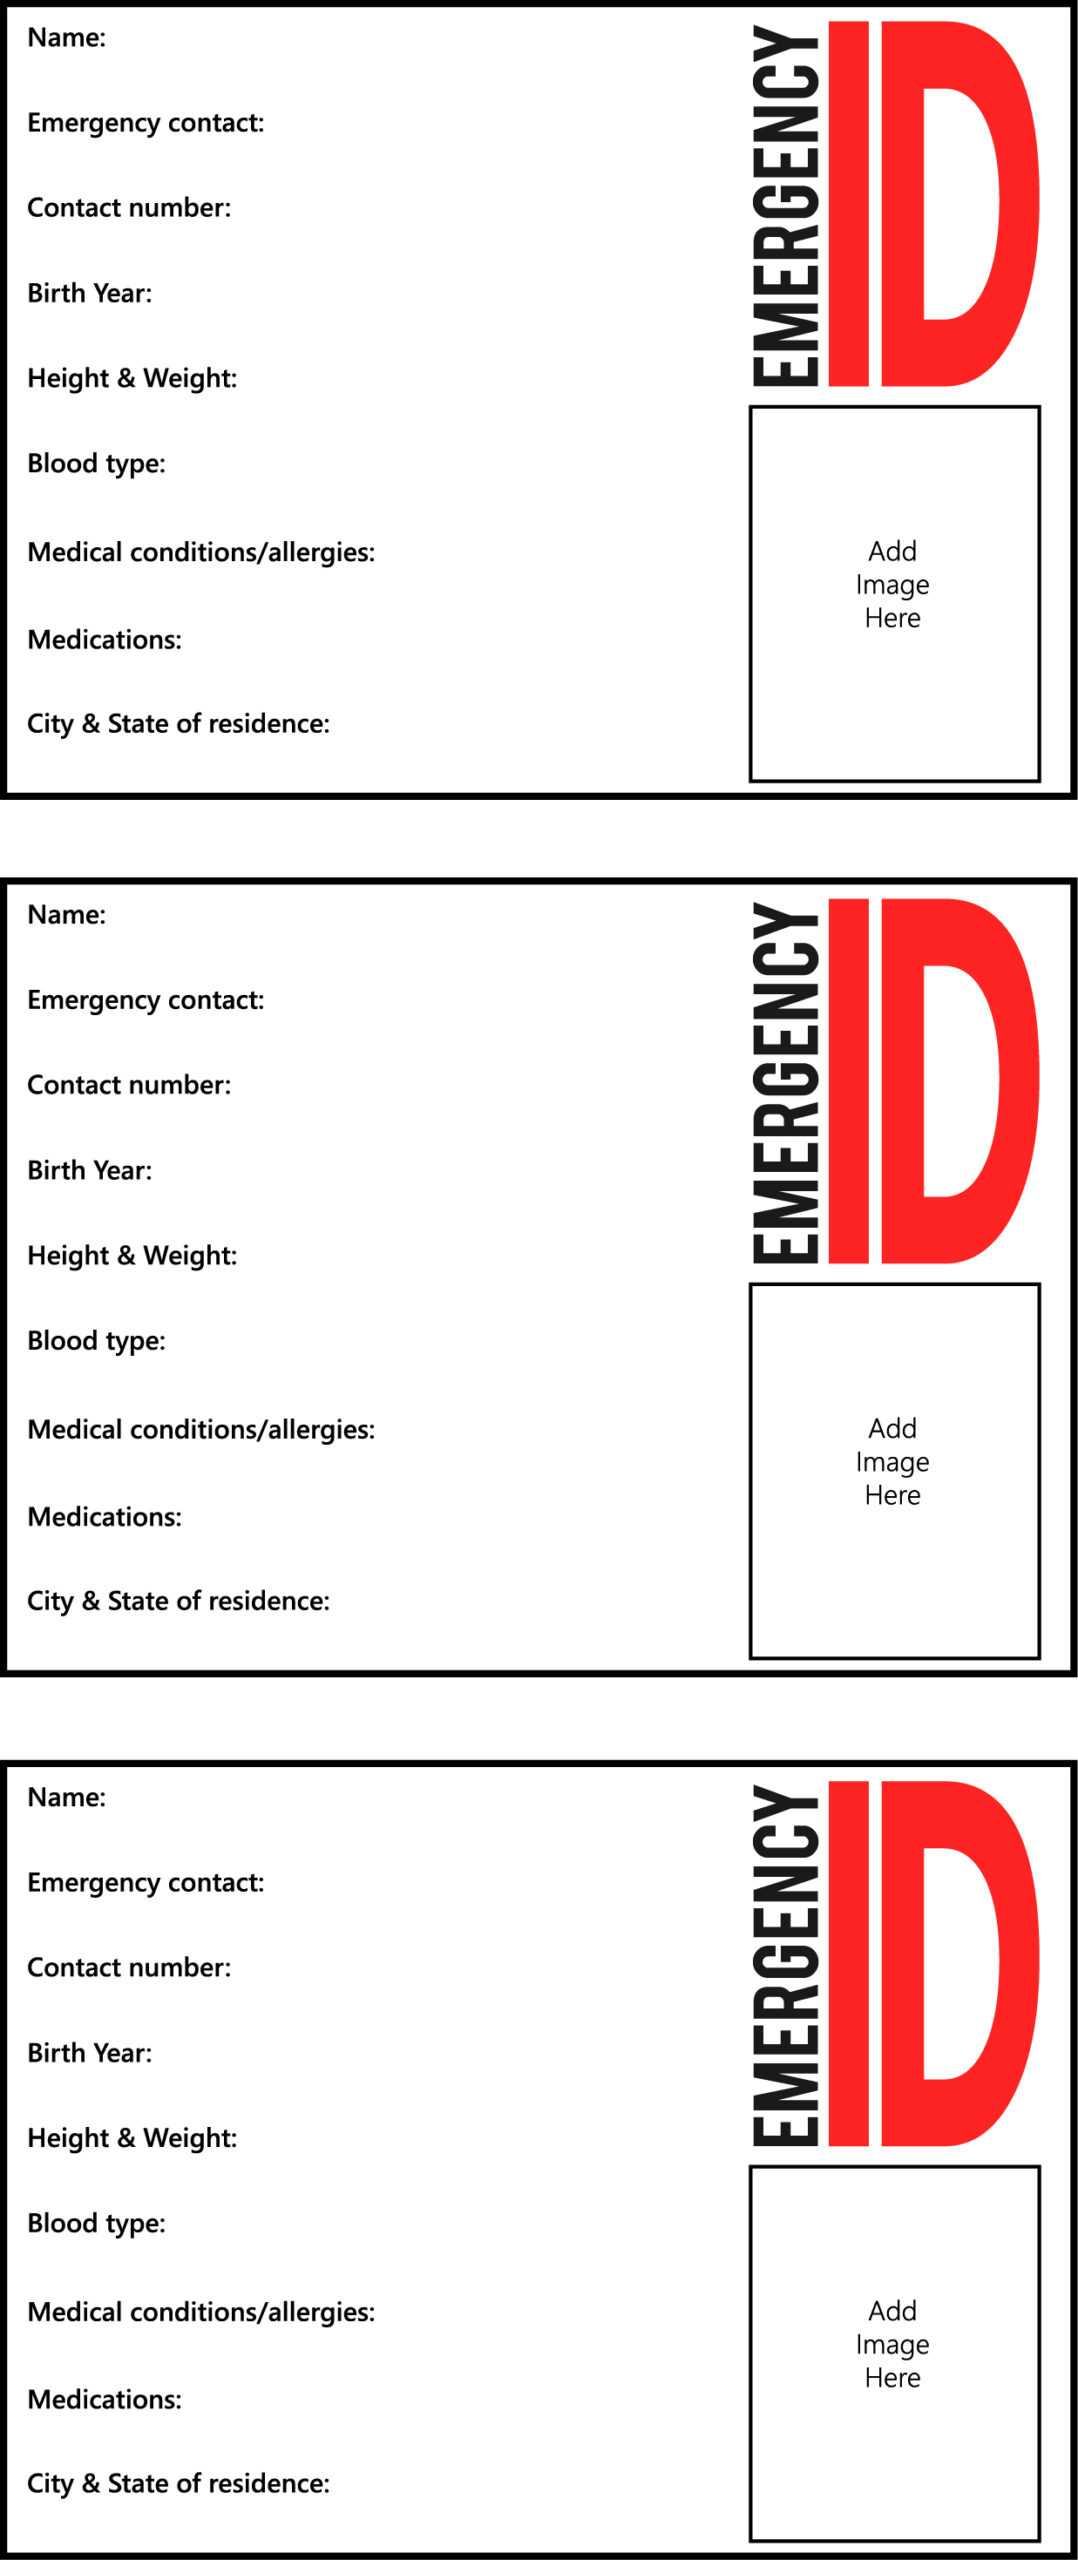 25 Images Of Fire Identification Card Template | Masorler Throughout In Case Of Emergency Card Template